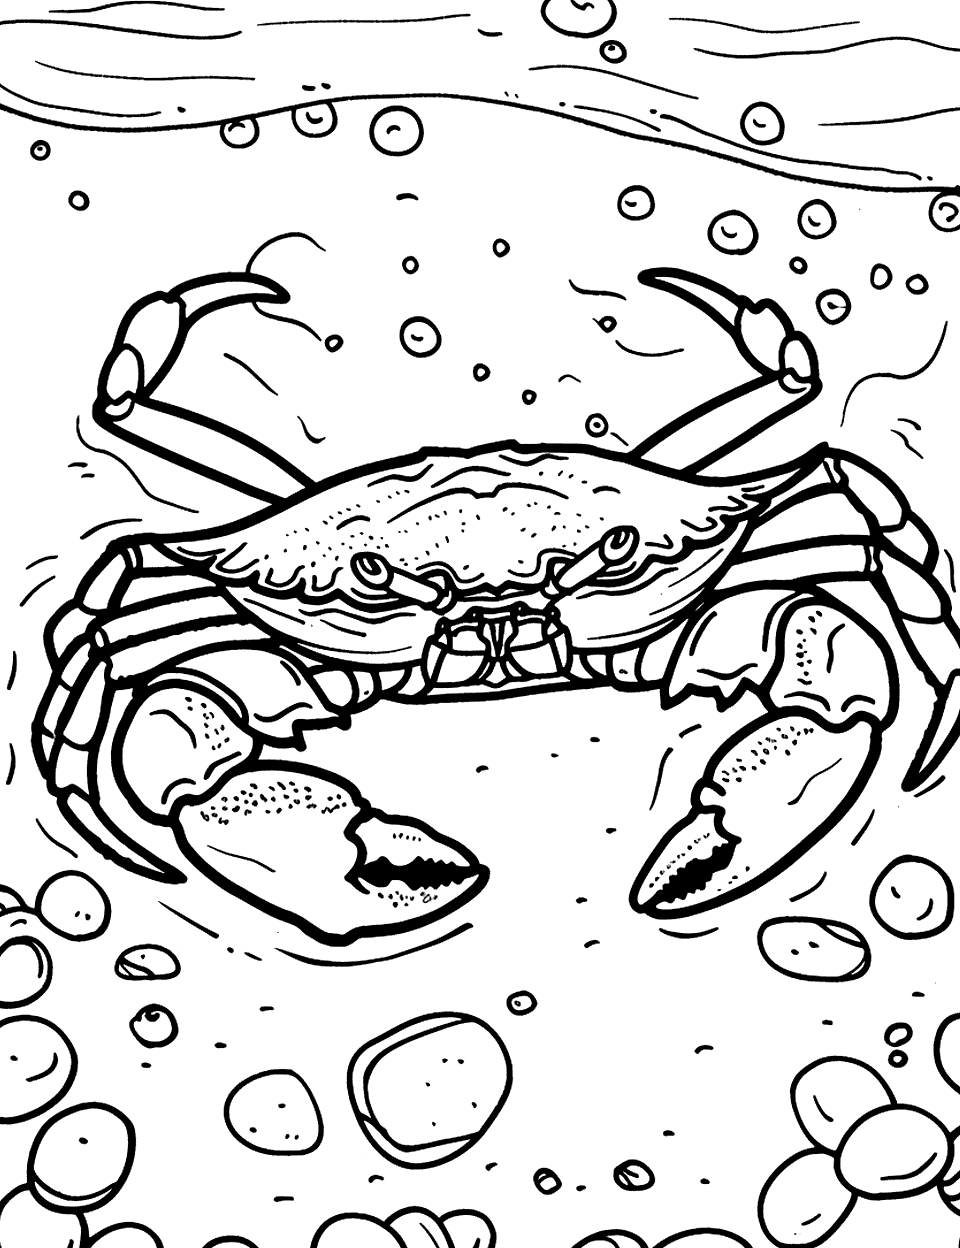 Tasmanian Giant Crab Coloring Page - A colossal Tasmanian crab perched on a sandy ocean bed, surrounded by pebbles.